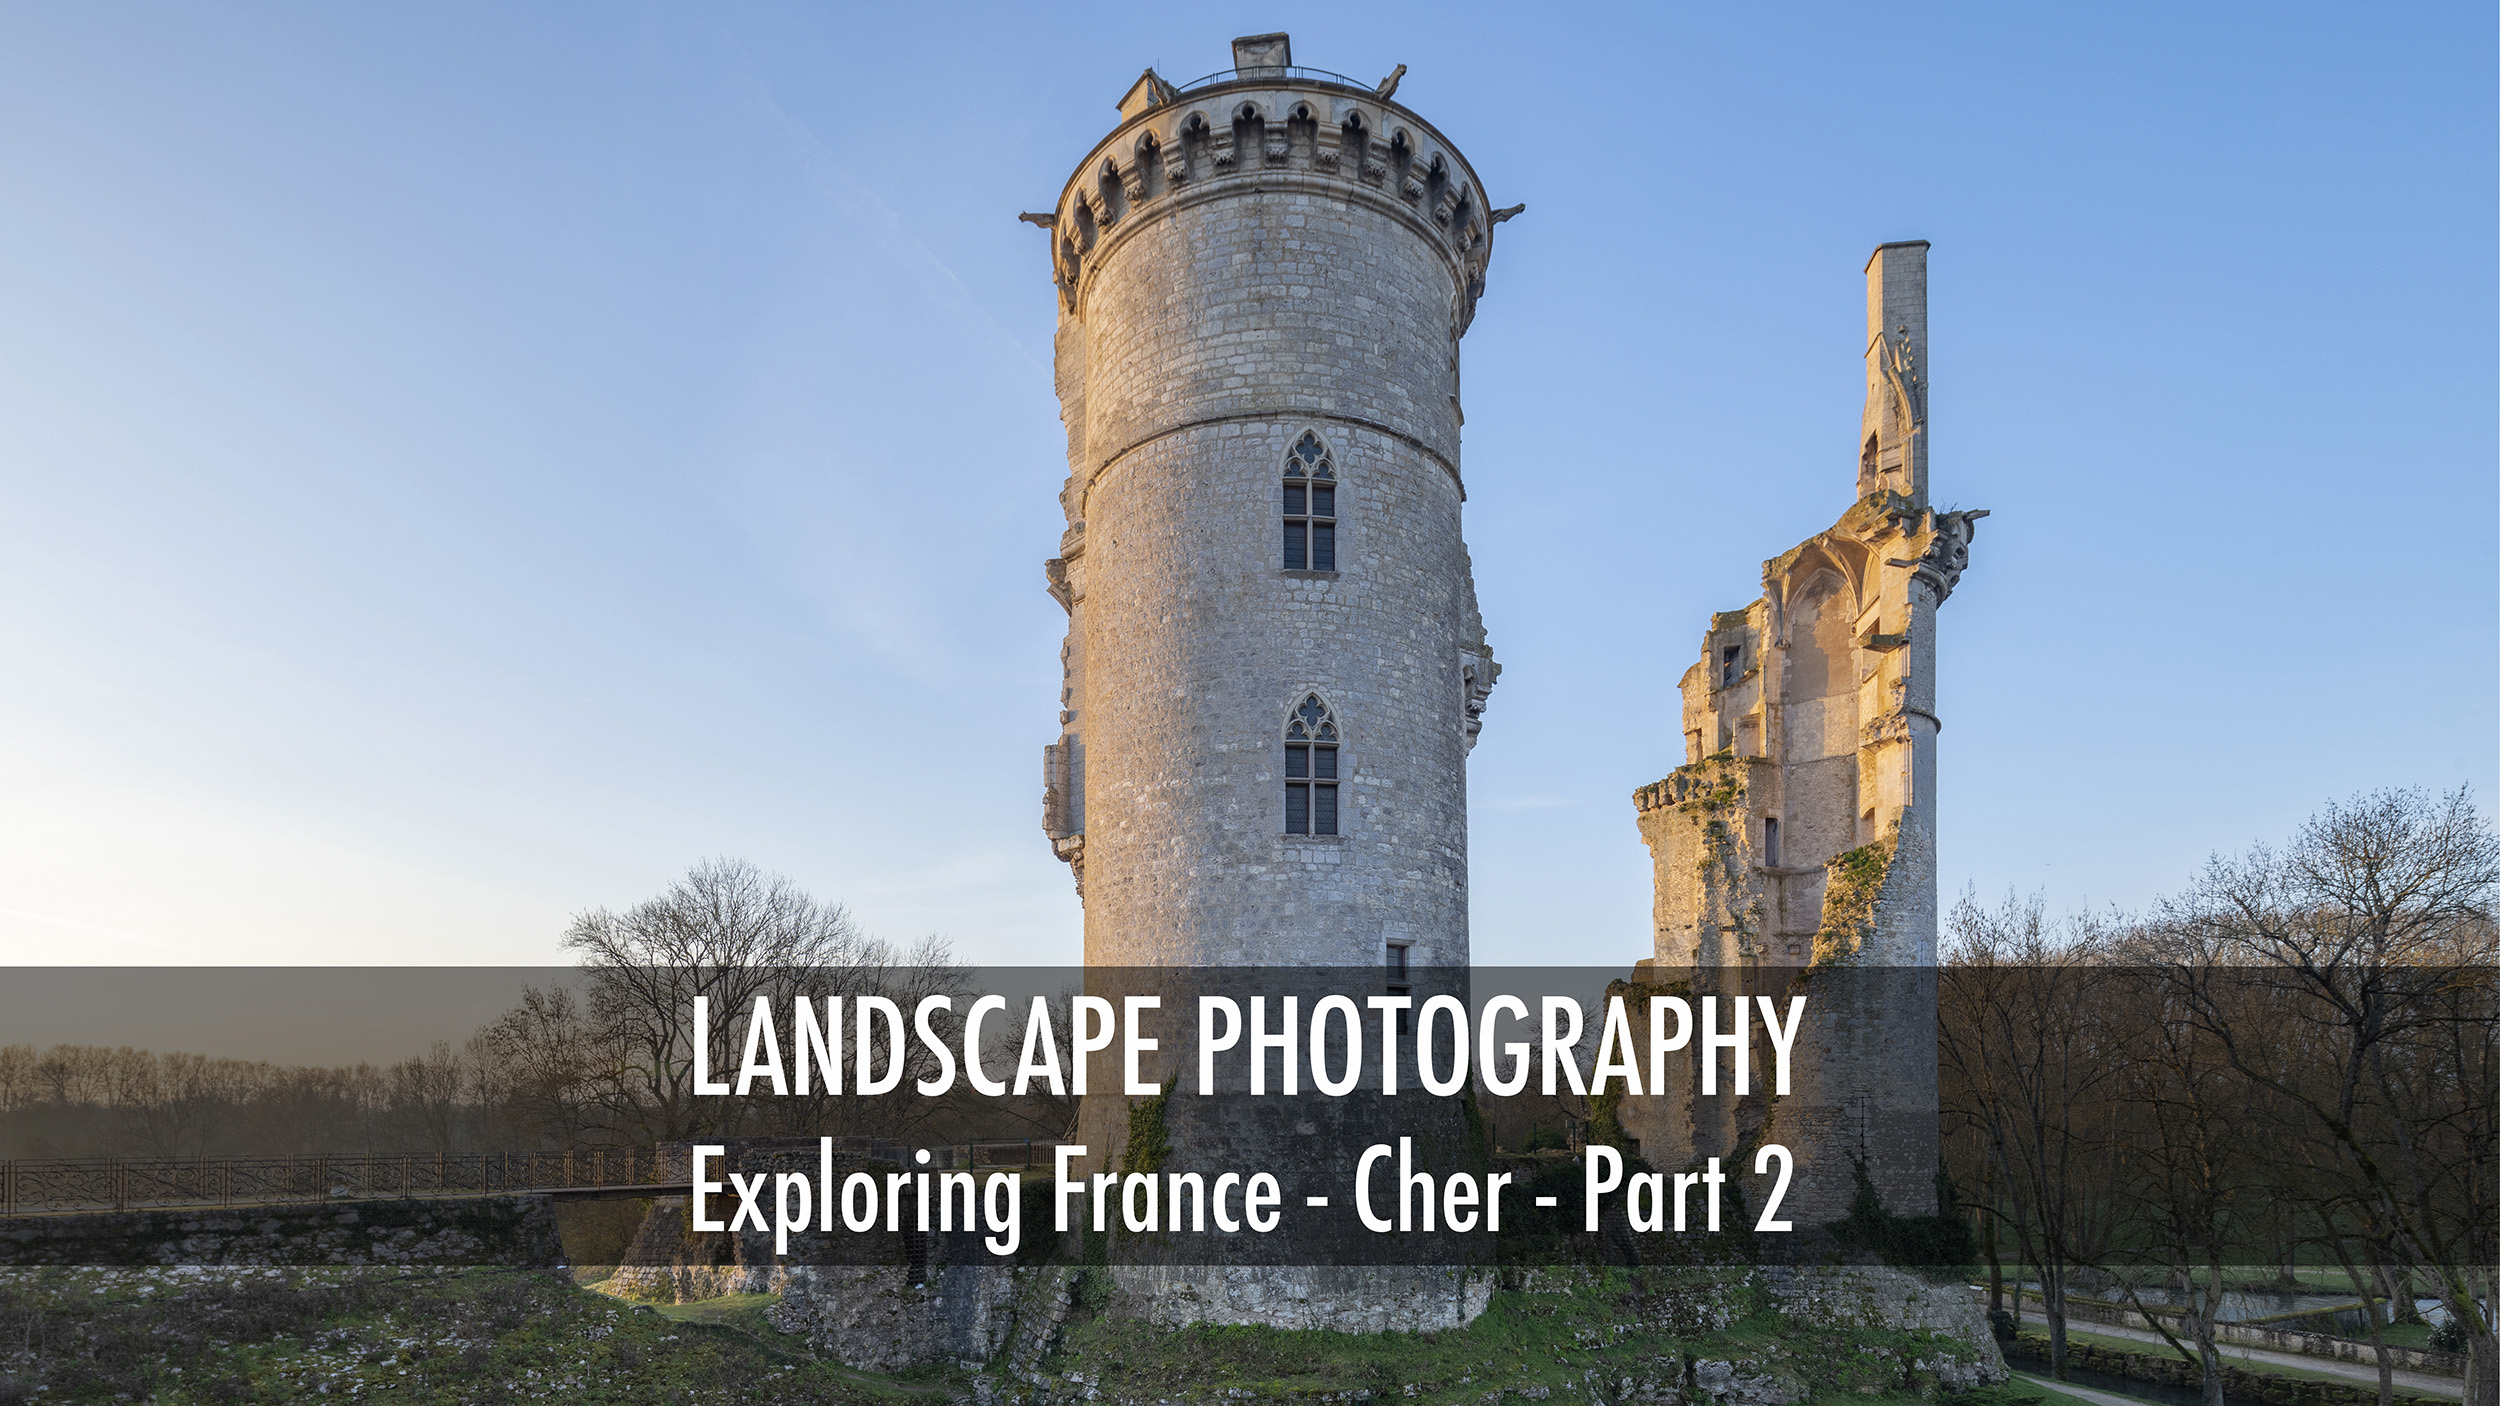 Exploring the Cher in France. Landscape photography.